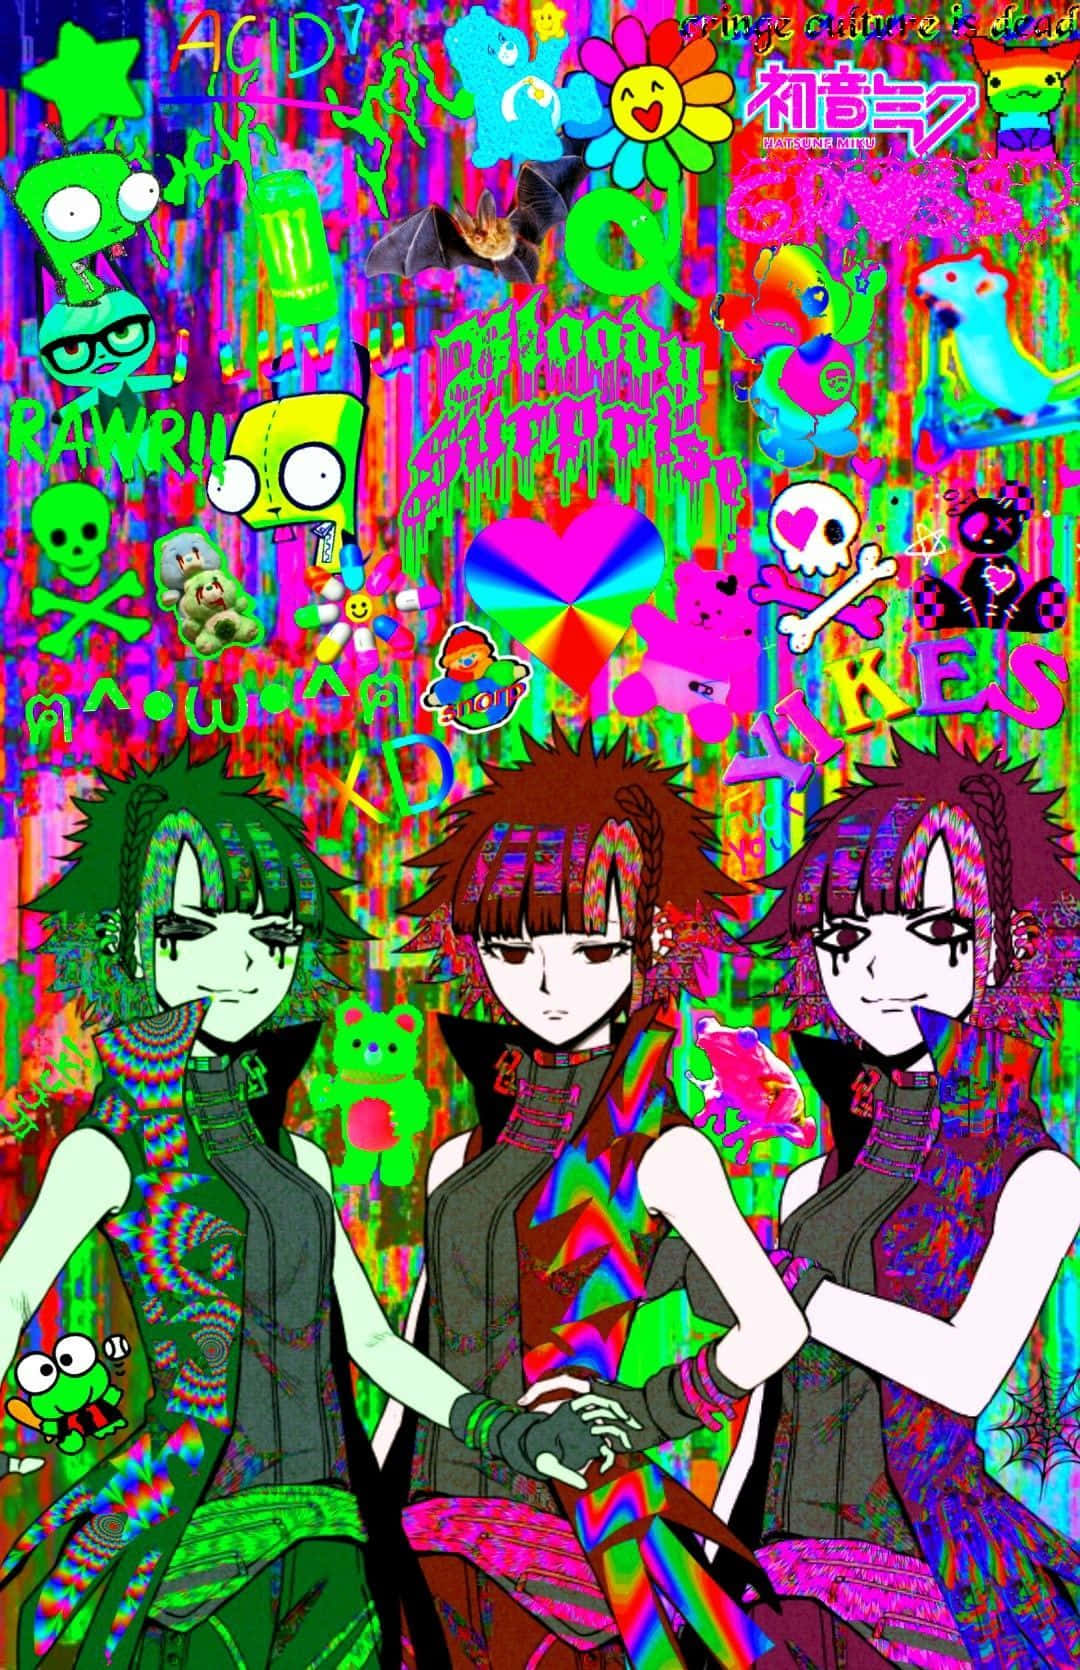 A Colorful Anime Art With Three Girls Standing In Front Of It